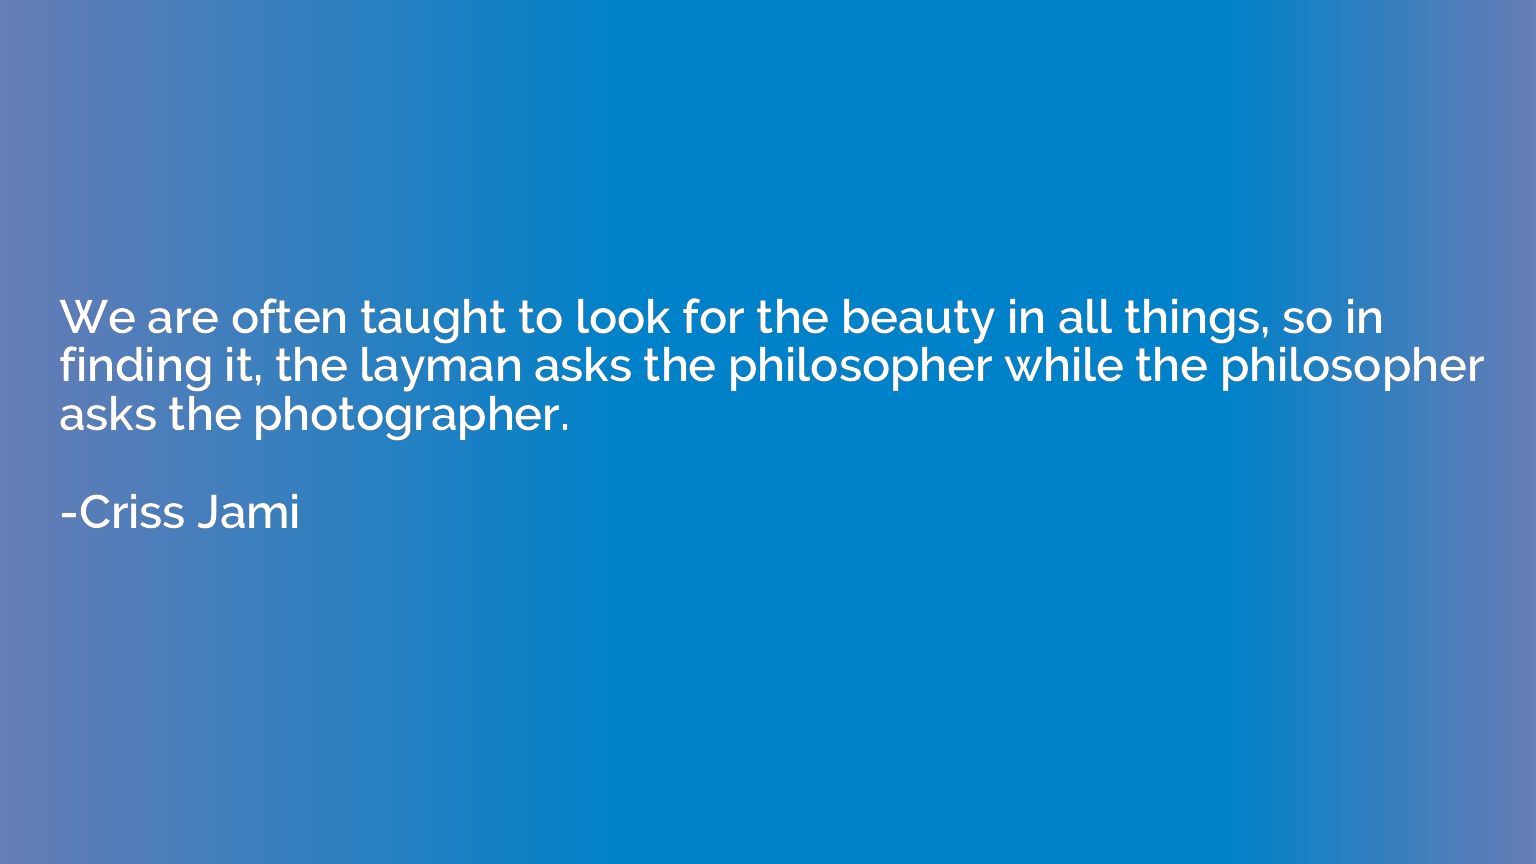 We are often taught to look for the beauty in all things, so